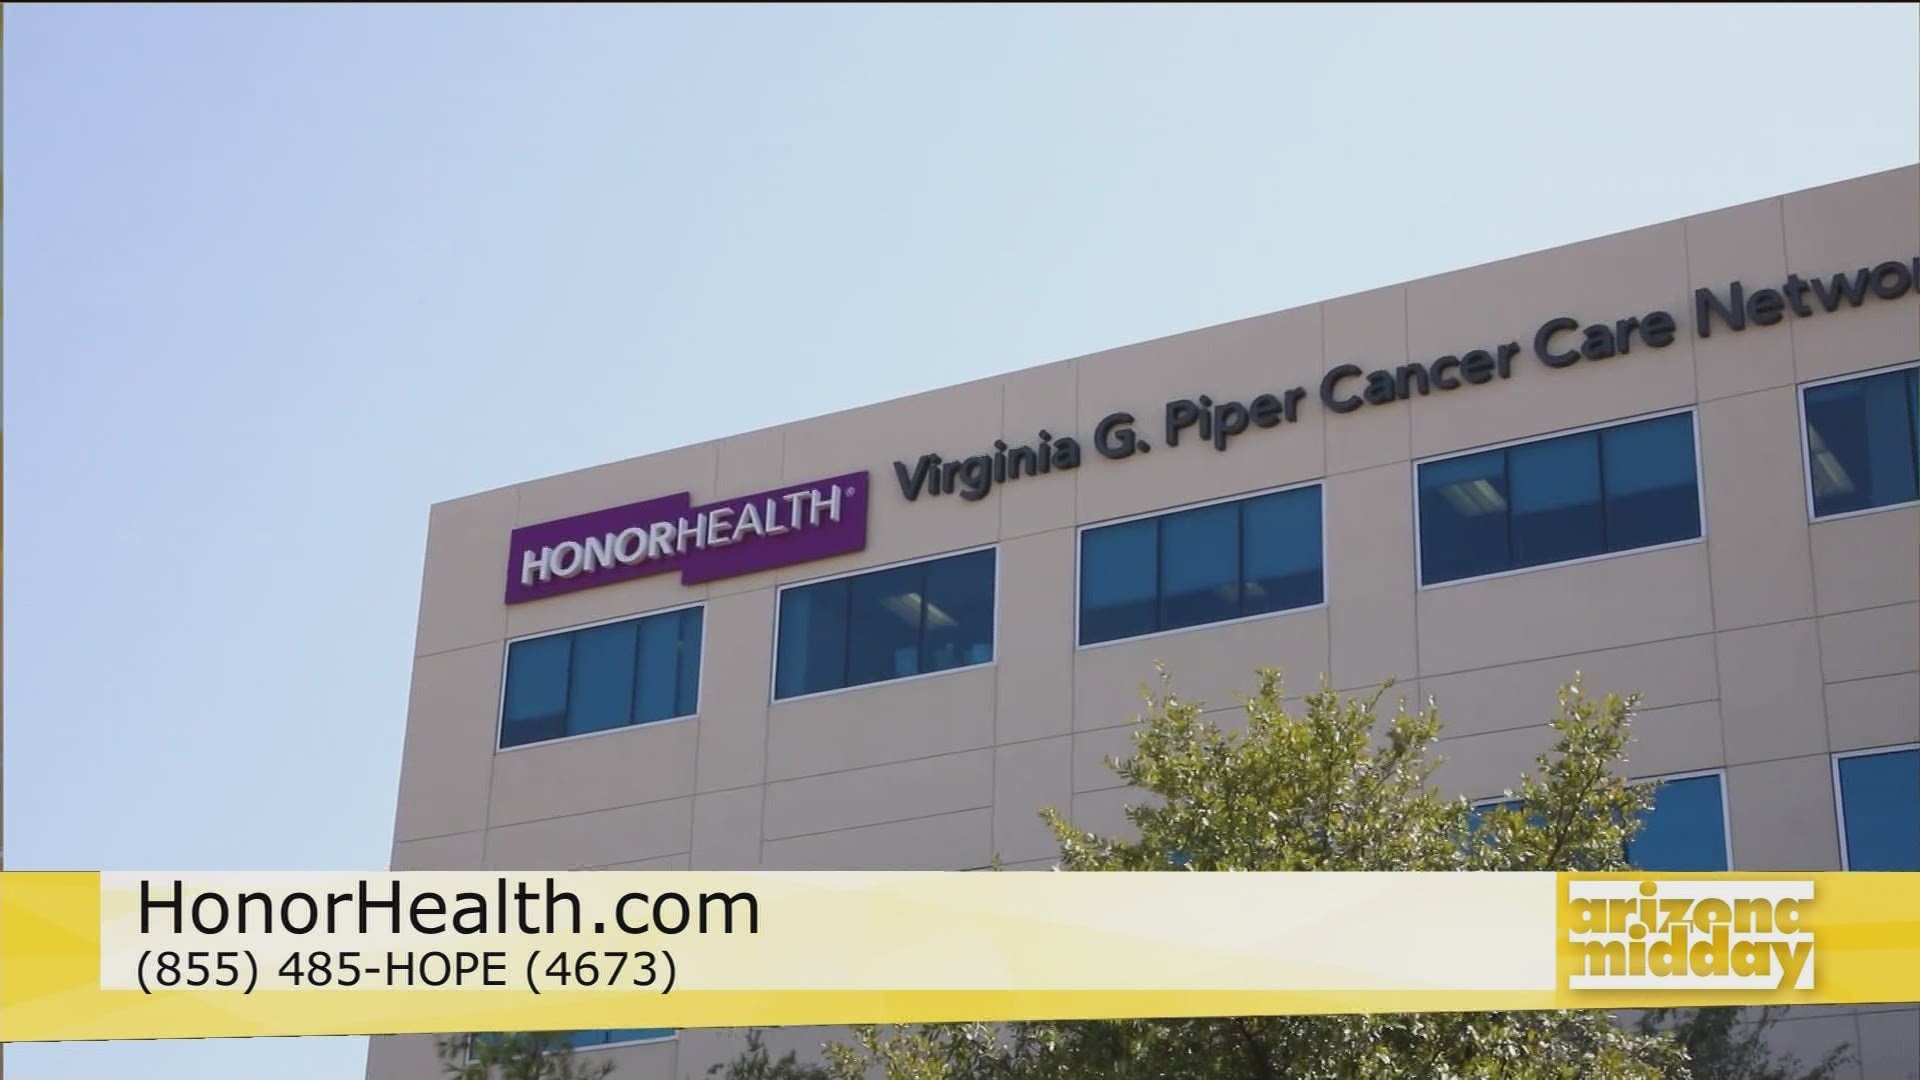 Brenda Moorthy, DO, FACS, shares how we can stay on top of our breast health with the Virginia G. Piper Comprehensive Breast Clinic at HonorHealth